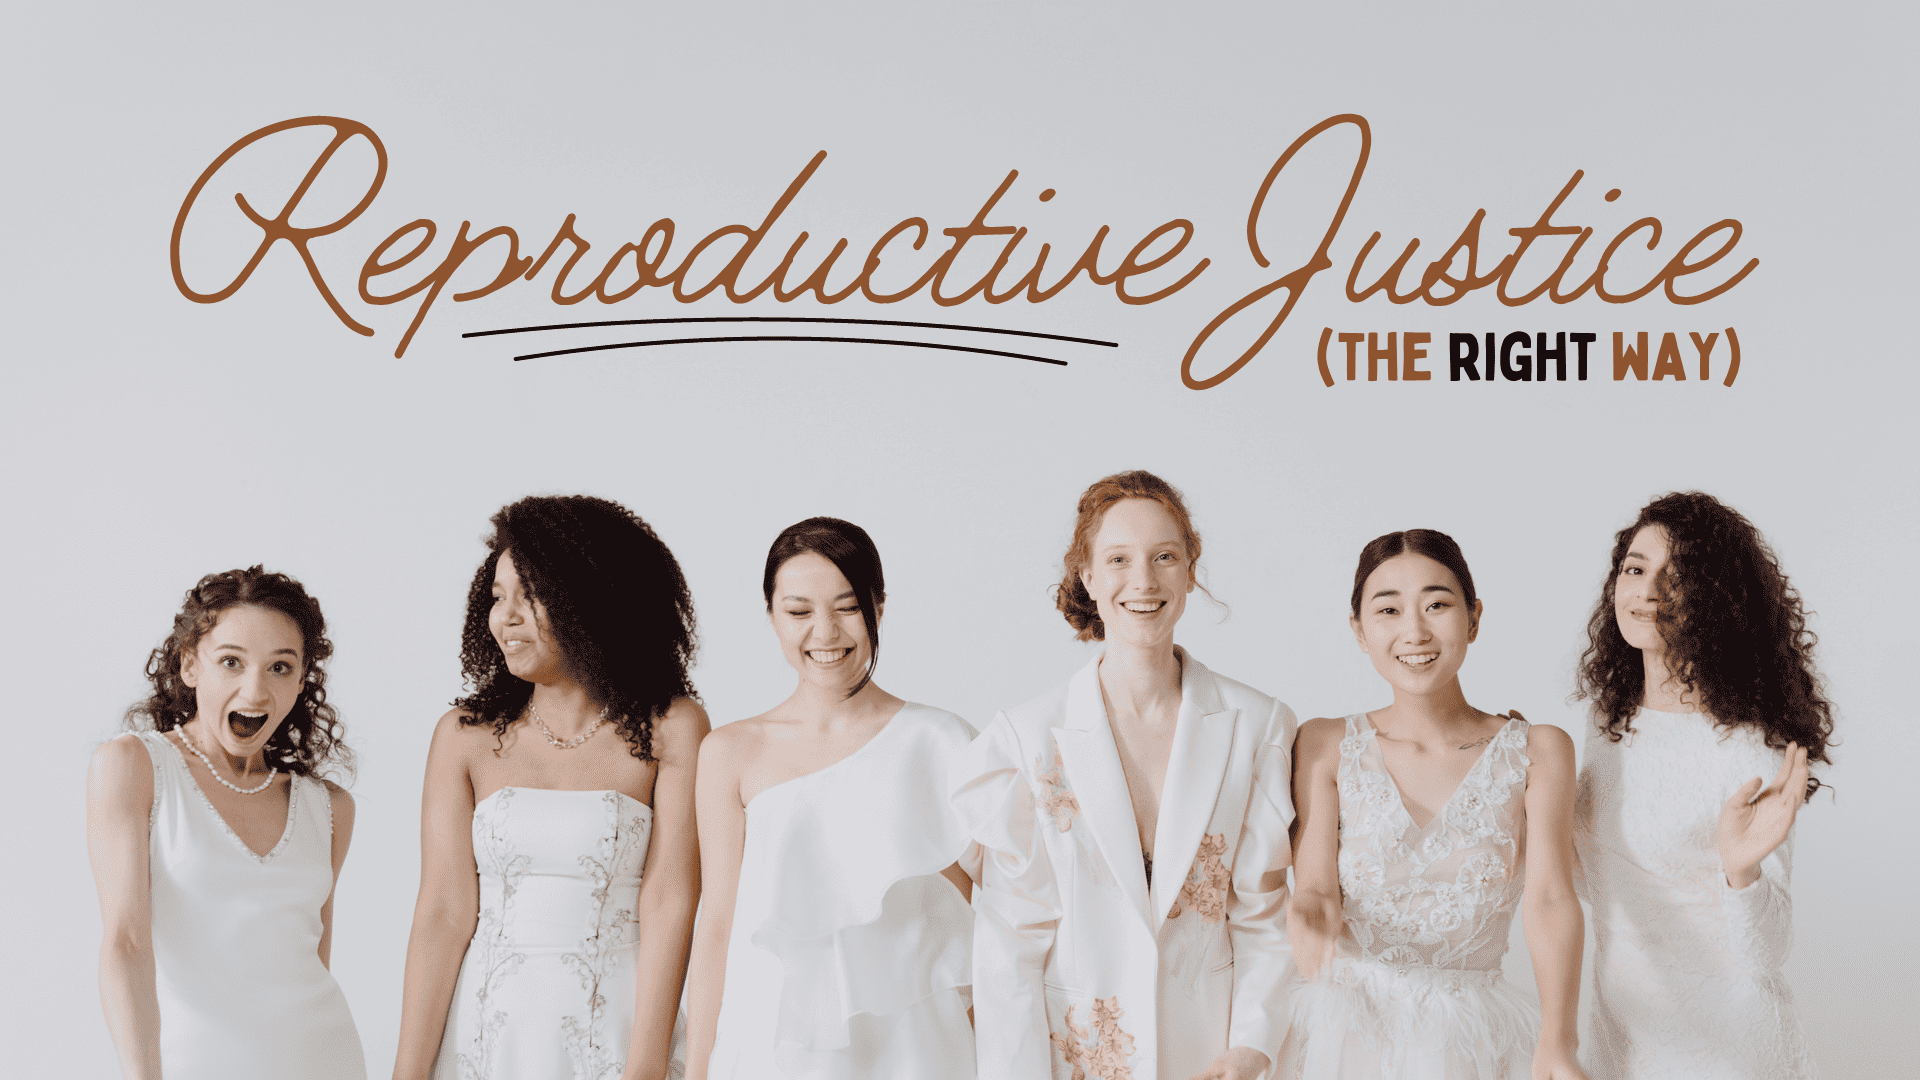 Photo of women happy because real reproductive justice doesn't have abortion